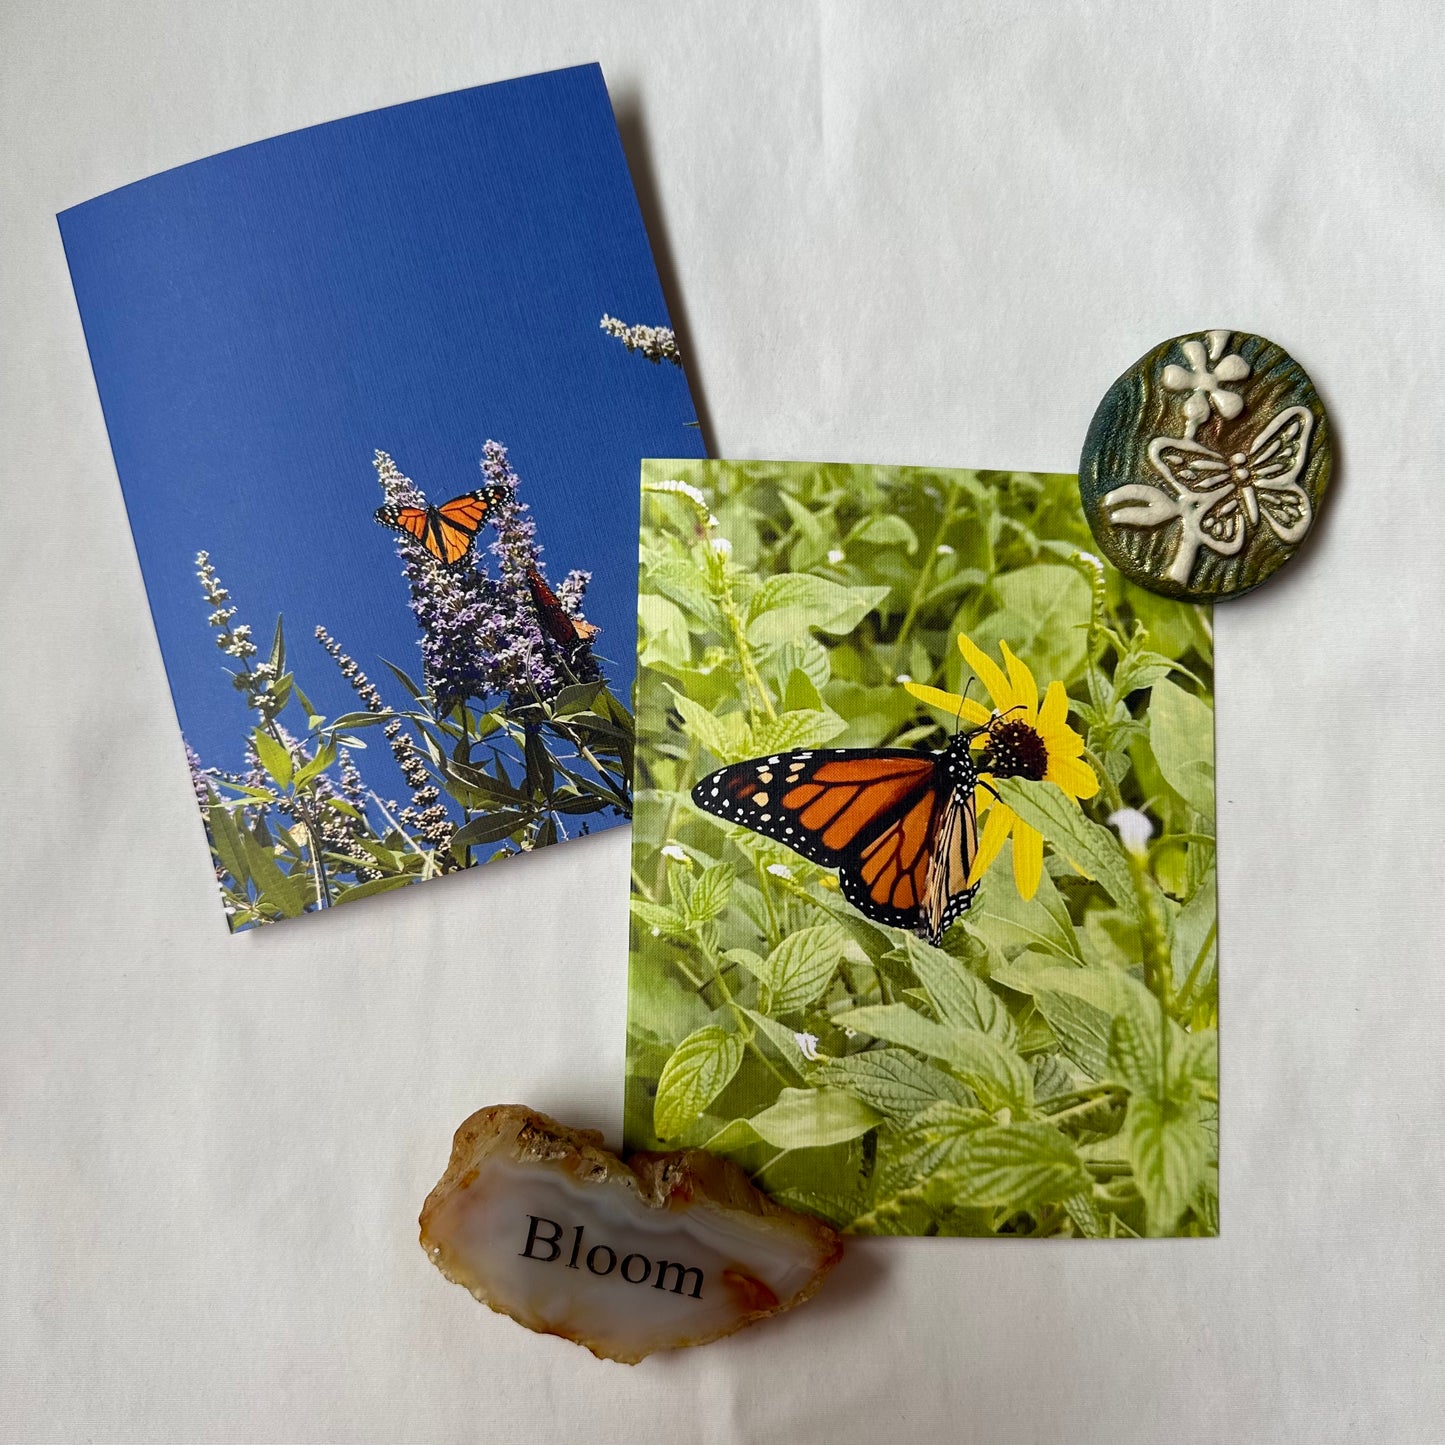 Butterfly Delight Set of Two Original Photography Greeting Cards with White Envelopes